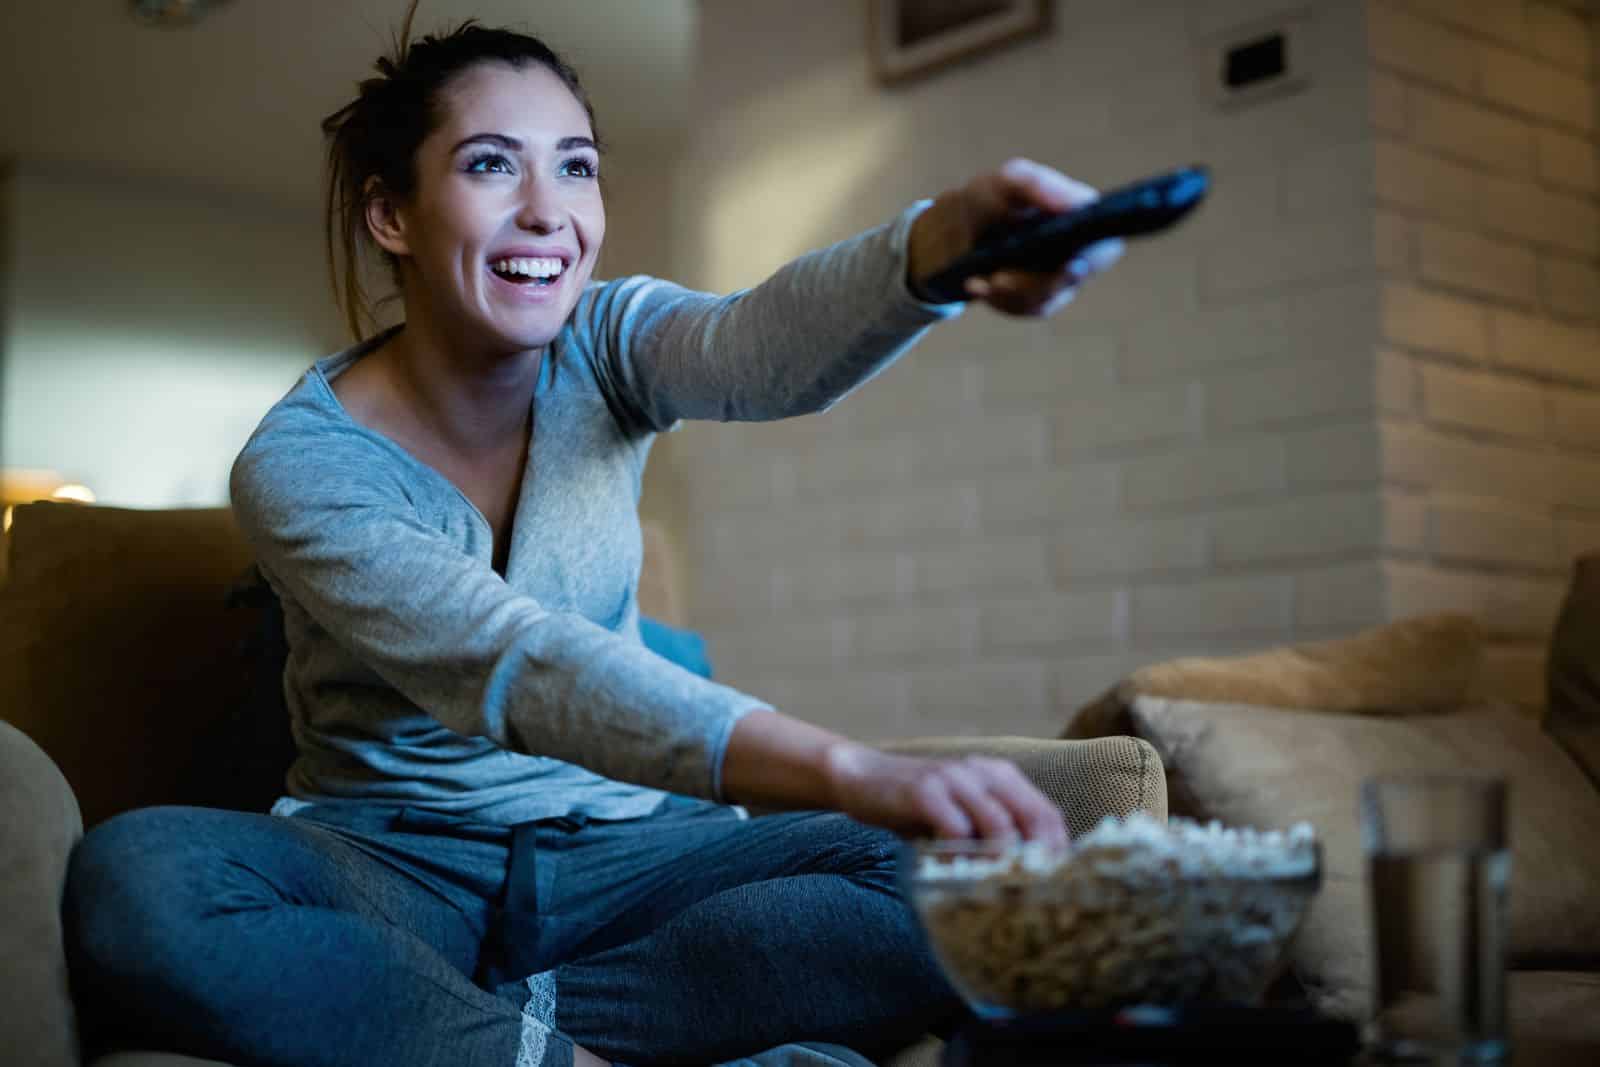 Image credit: Shutterstock / Drazen Zigic <p>A Netflix subscription may be the language tool you already have in your back pocket. With plenty of shows from all around the world, Netflix could offer the chance for viewers to build listening skills while hearing local colloquialisms.</p>